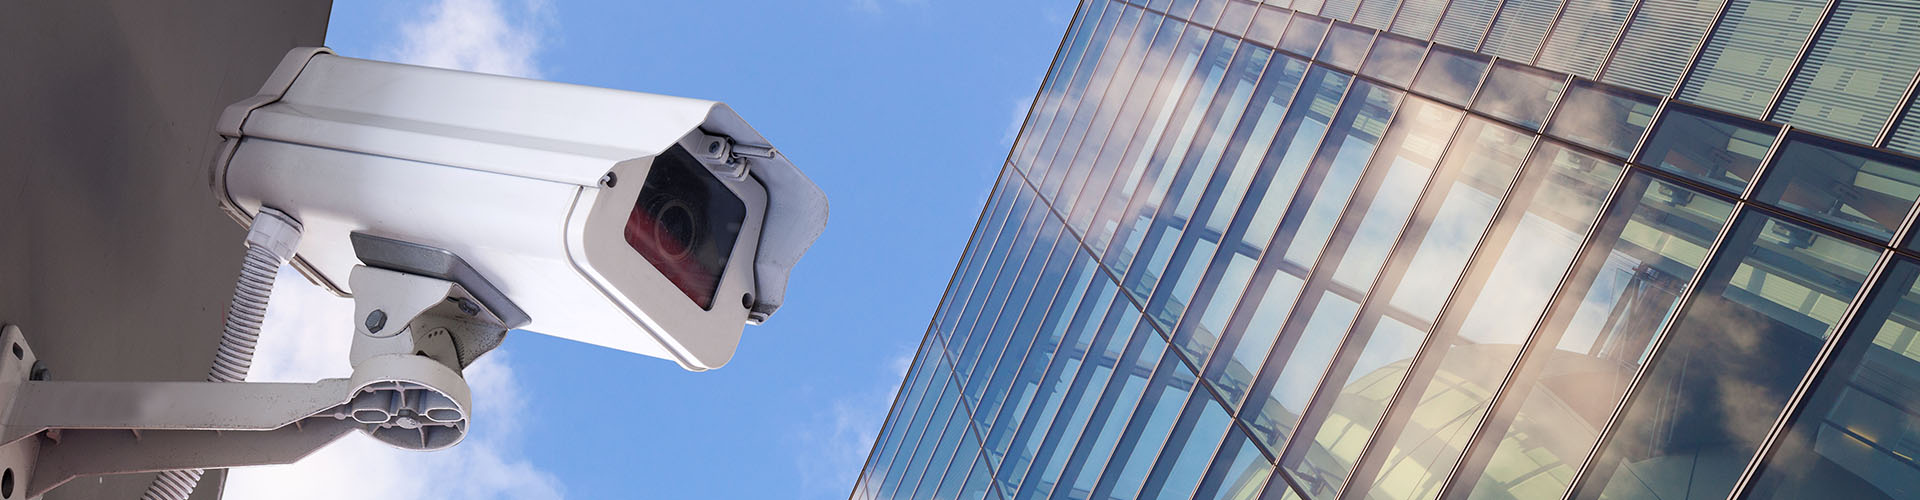 VIDEO SURVEILLANCE SYSTEMS FOR YOUR BUSINESS<br />
